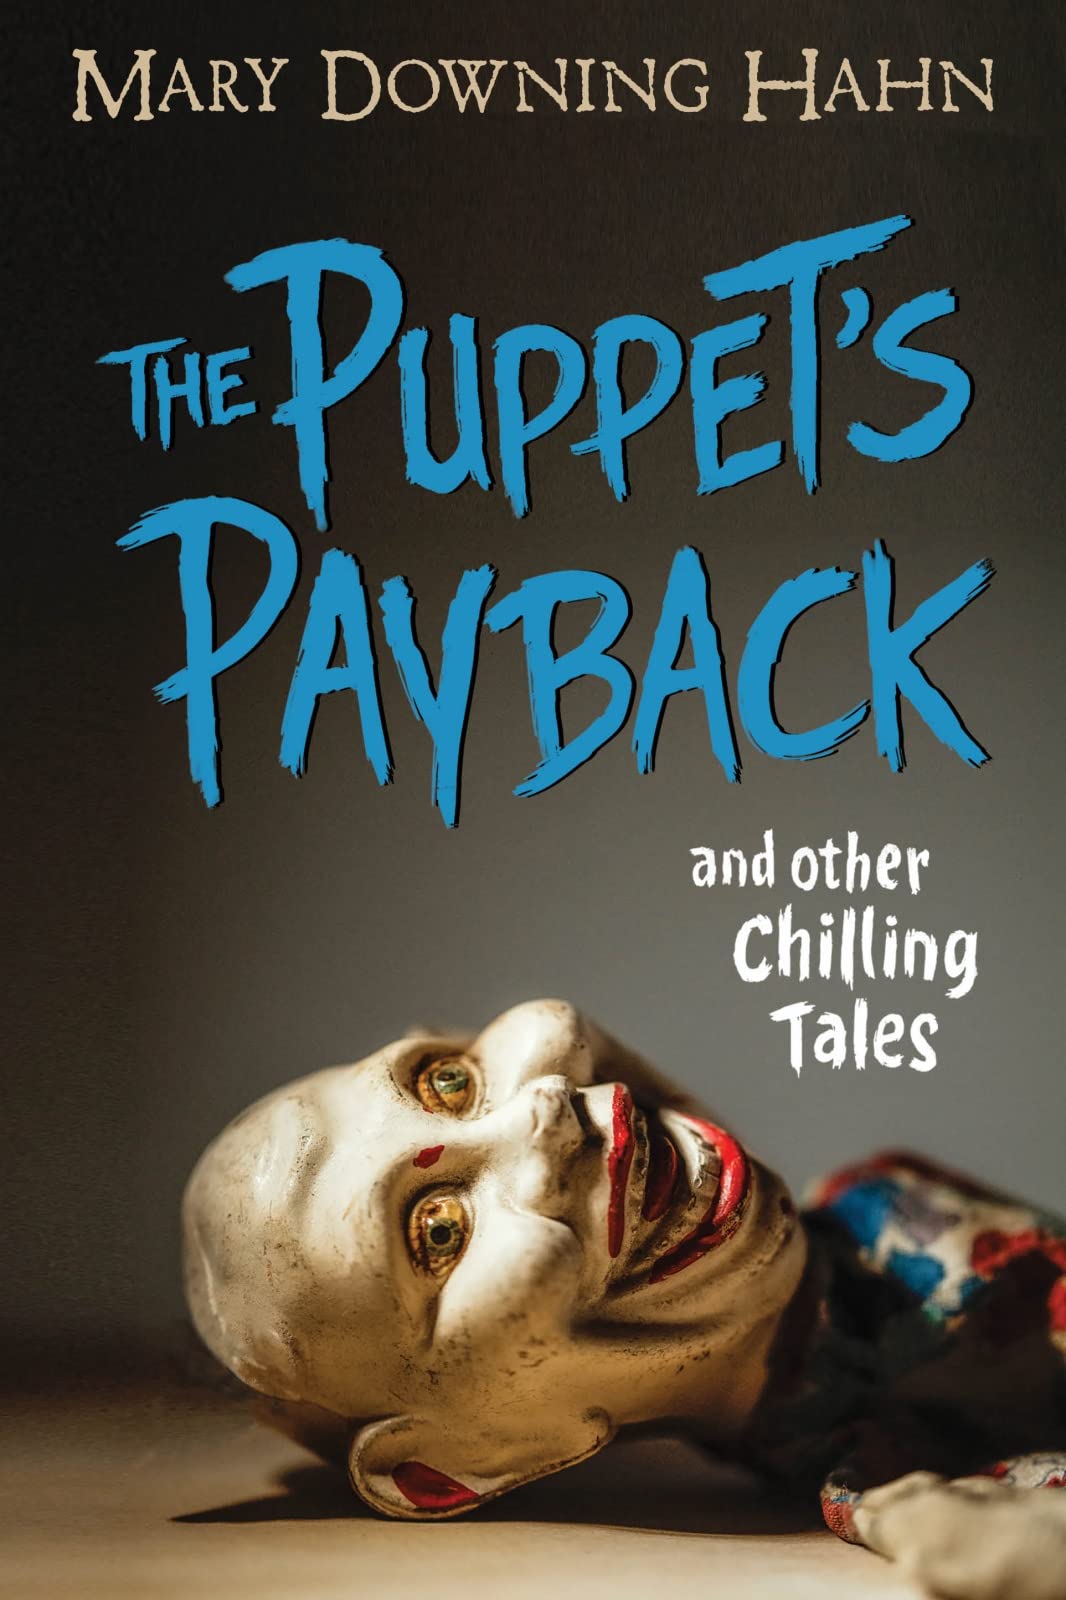 "The Puppet's Payback" by Mary Downing Hahn